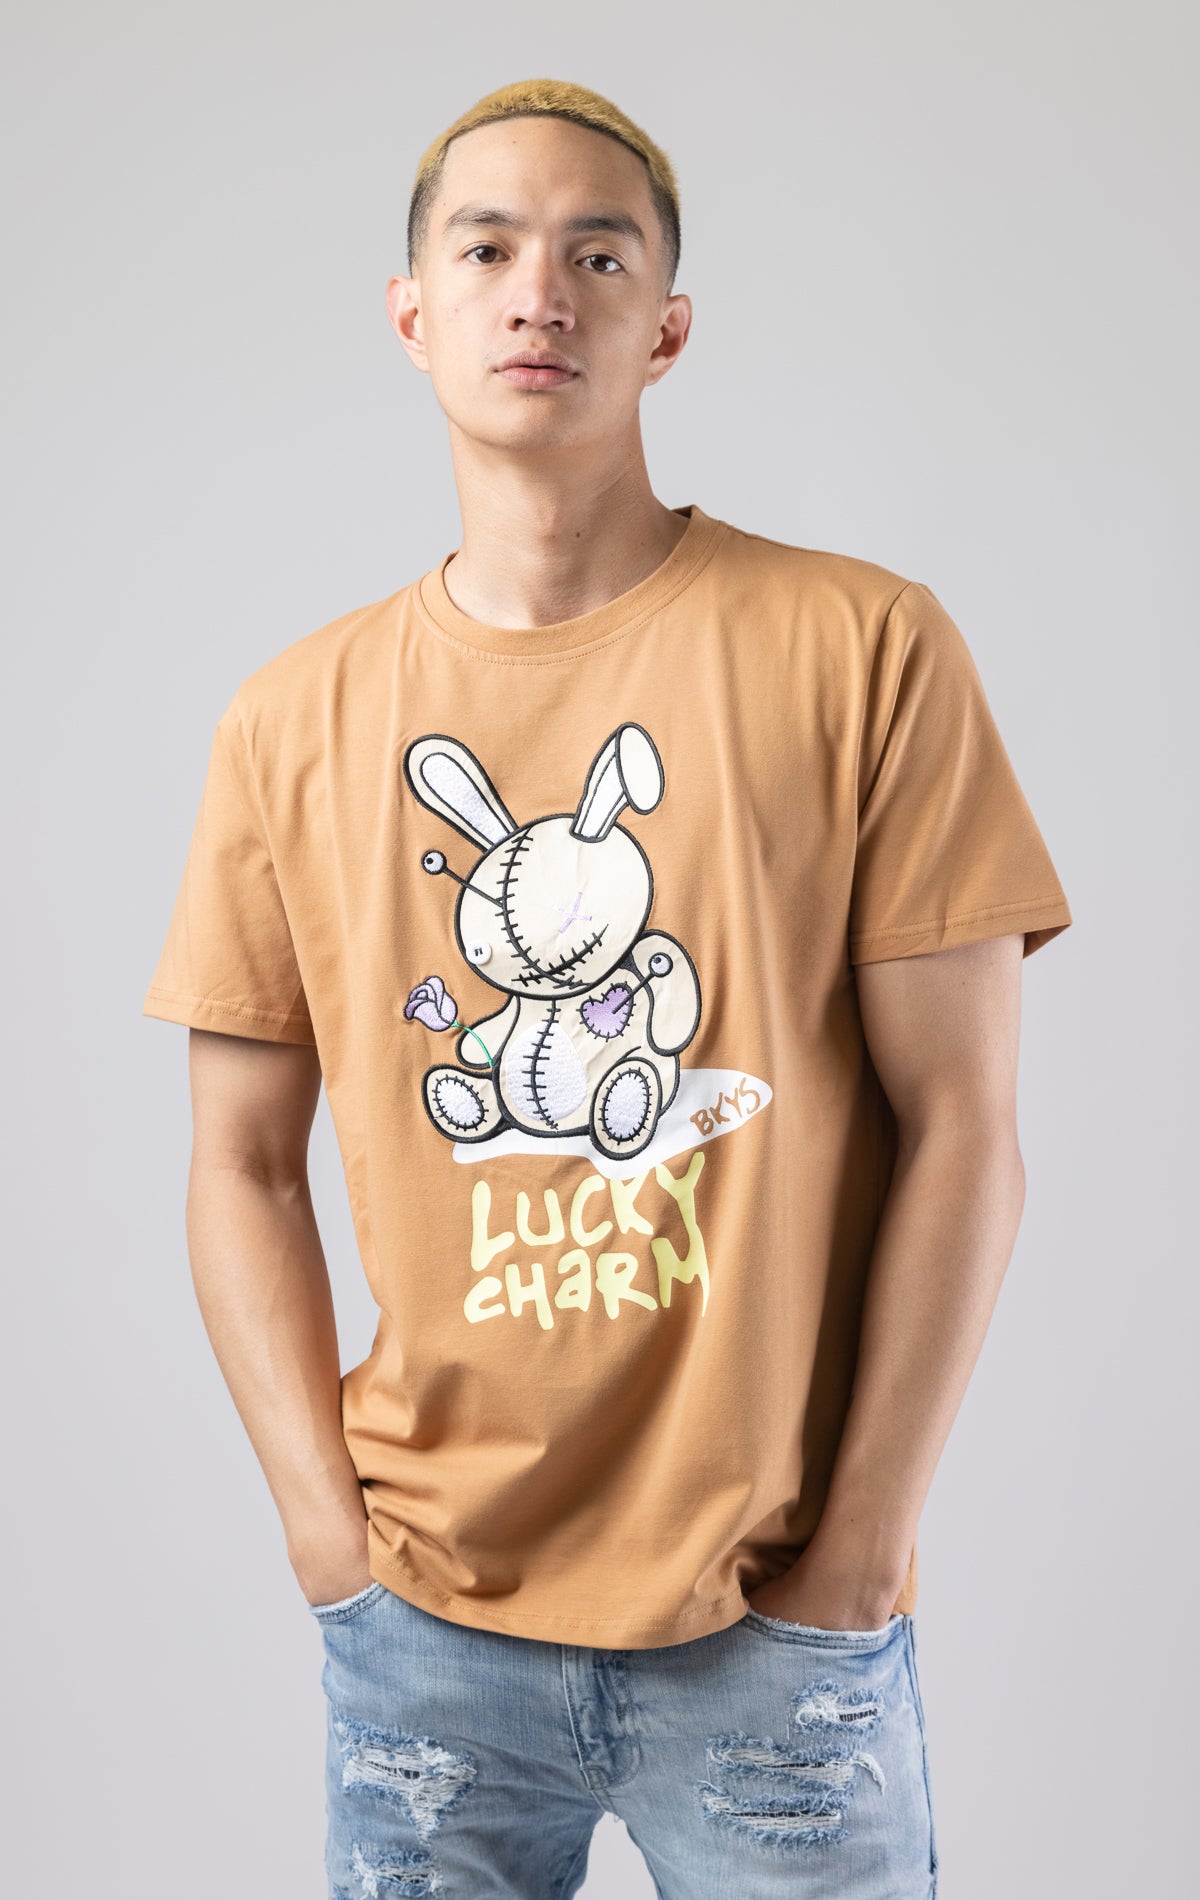 Wheat Crewneck, short-sleeve BKYS Lucky Charm t-shirt with bunny graphic on front